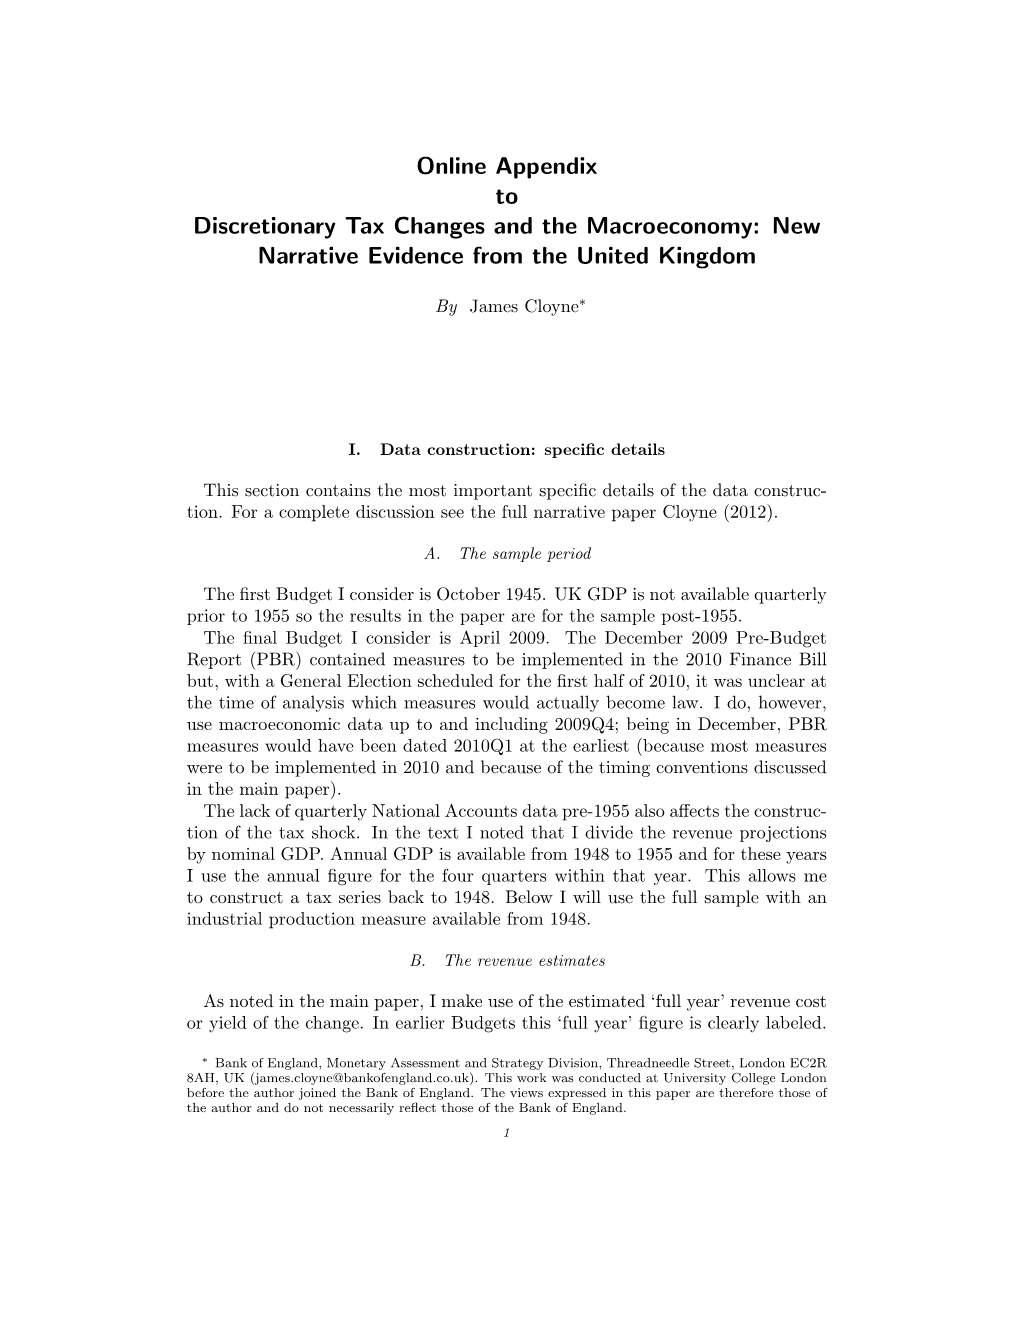 Online Appendix to Discretionary Tax Changes and the Macroeconomy: New Narrative Evidence from the United Kingdom